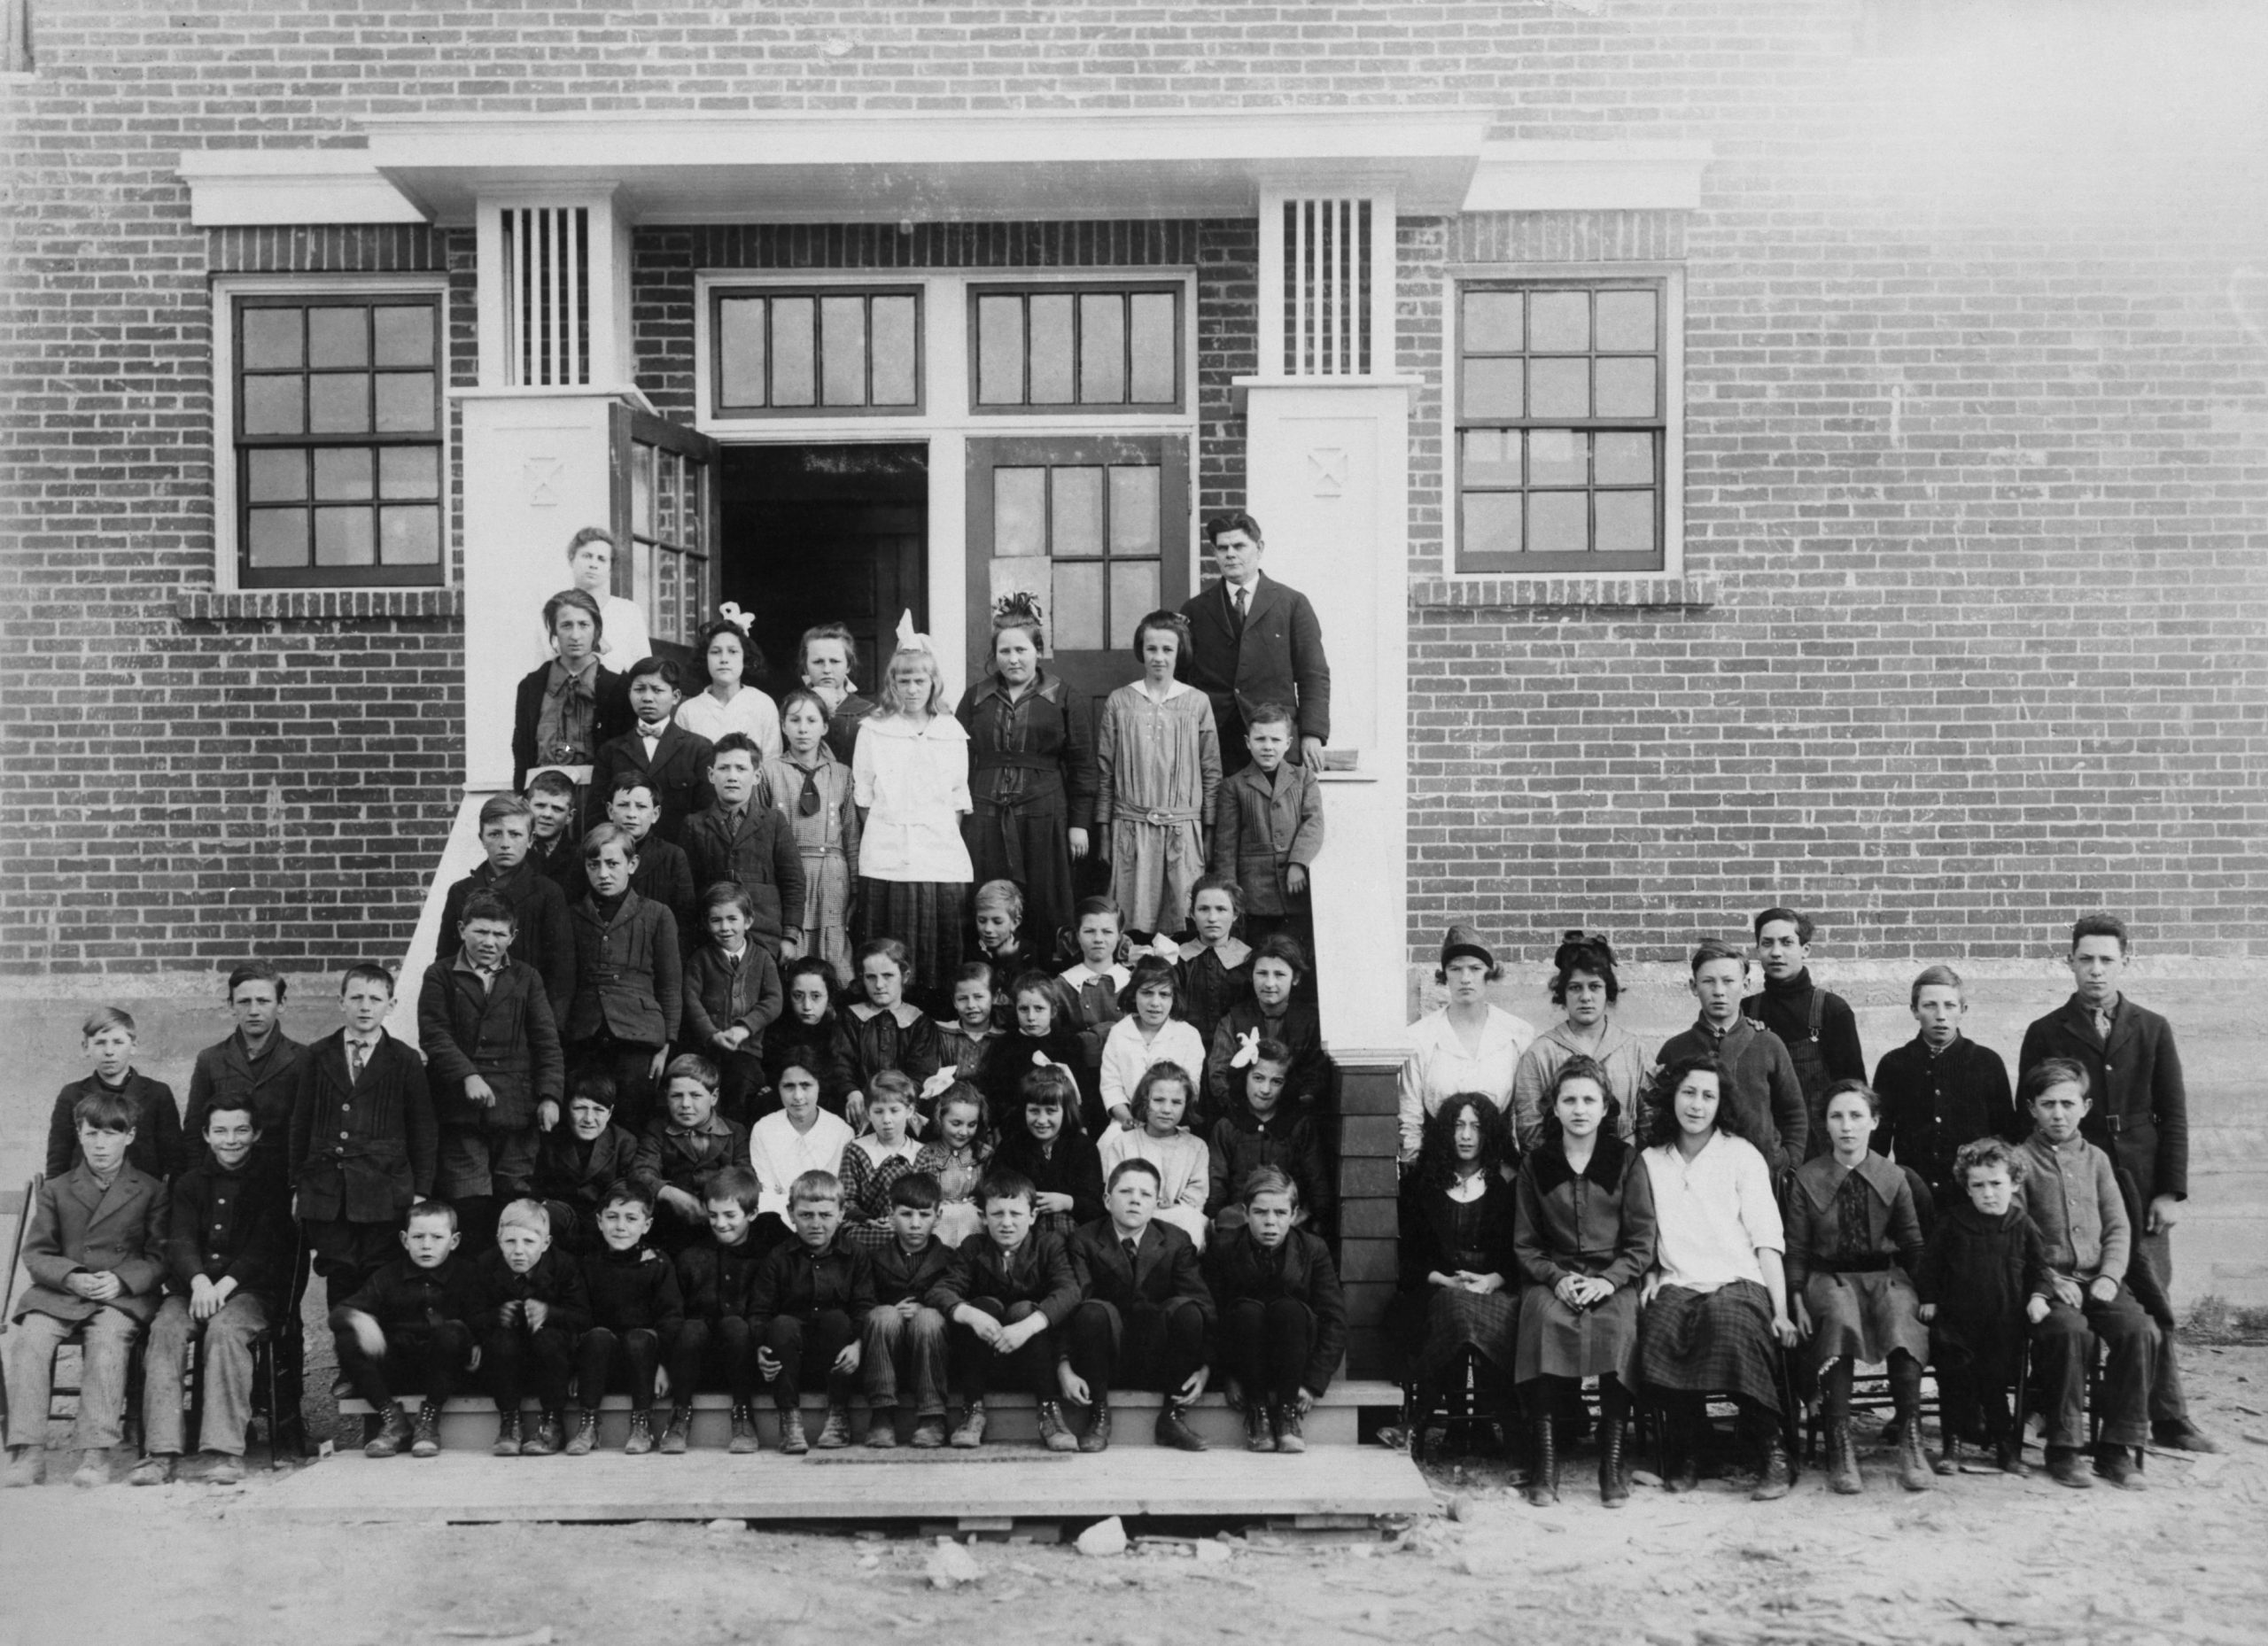 Large school photo of children sitting on the front steps of the two story brick school.